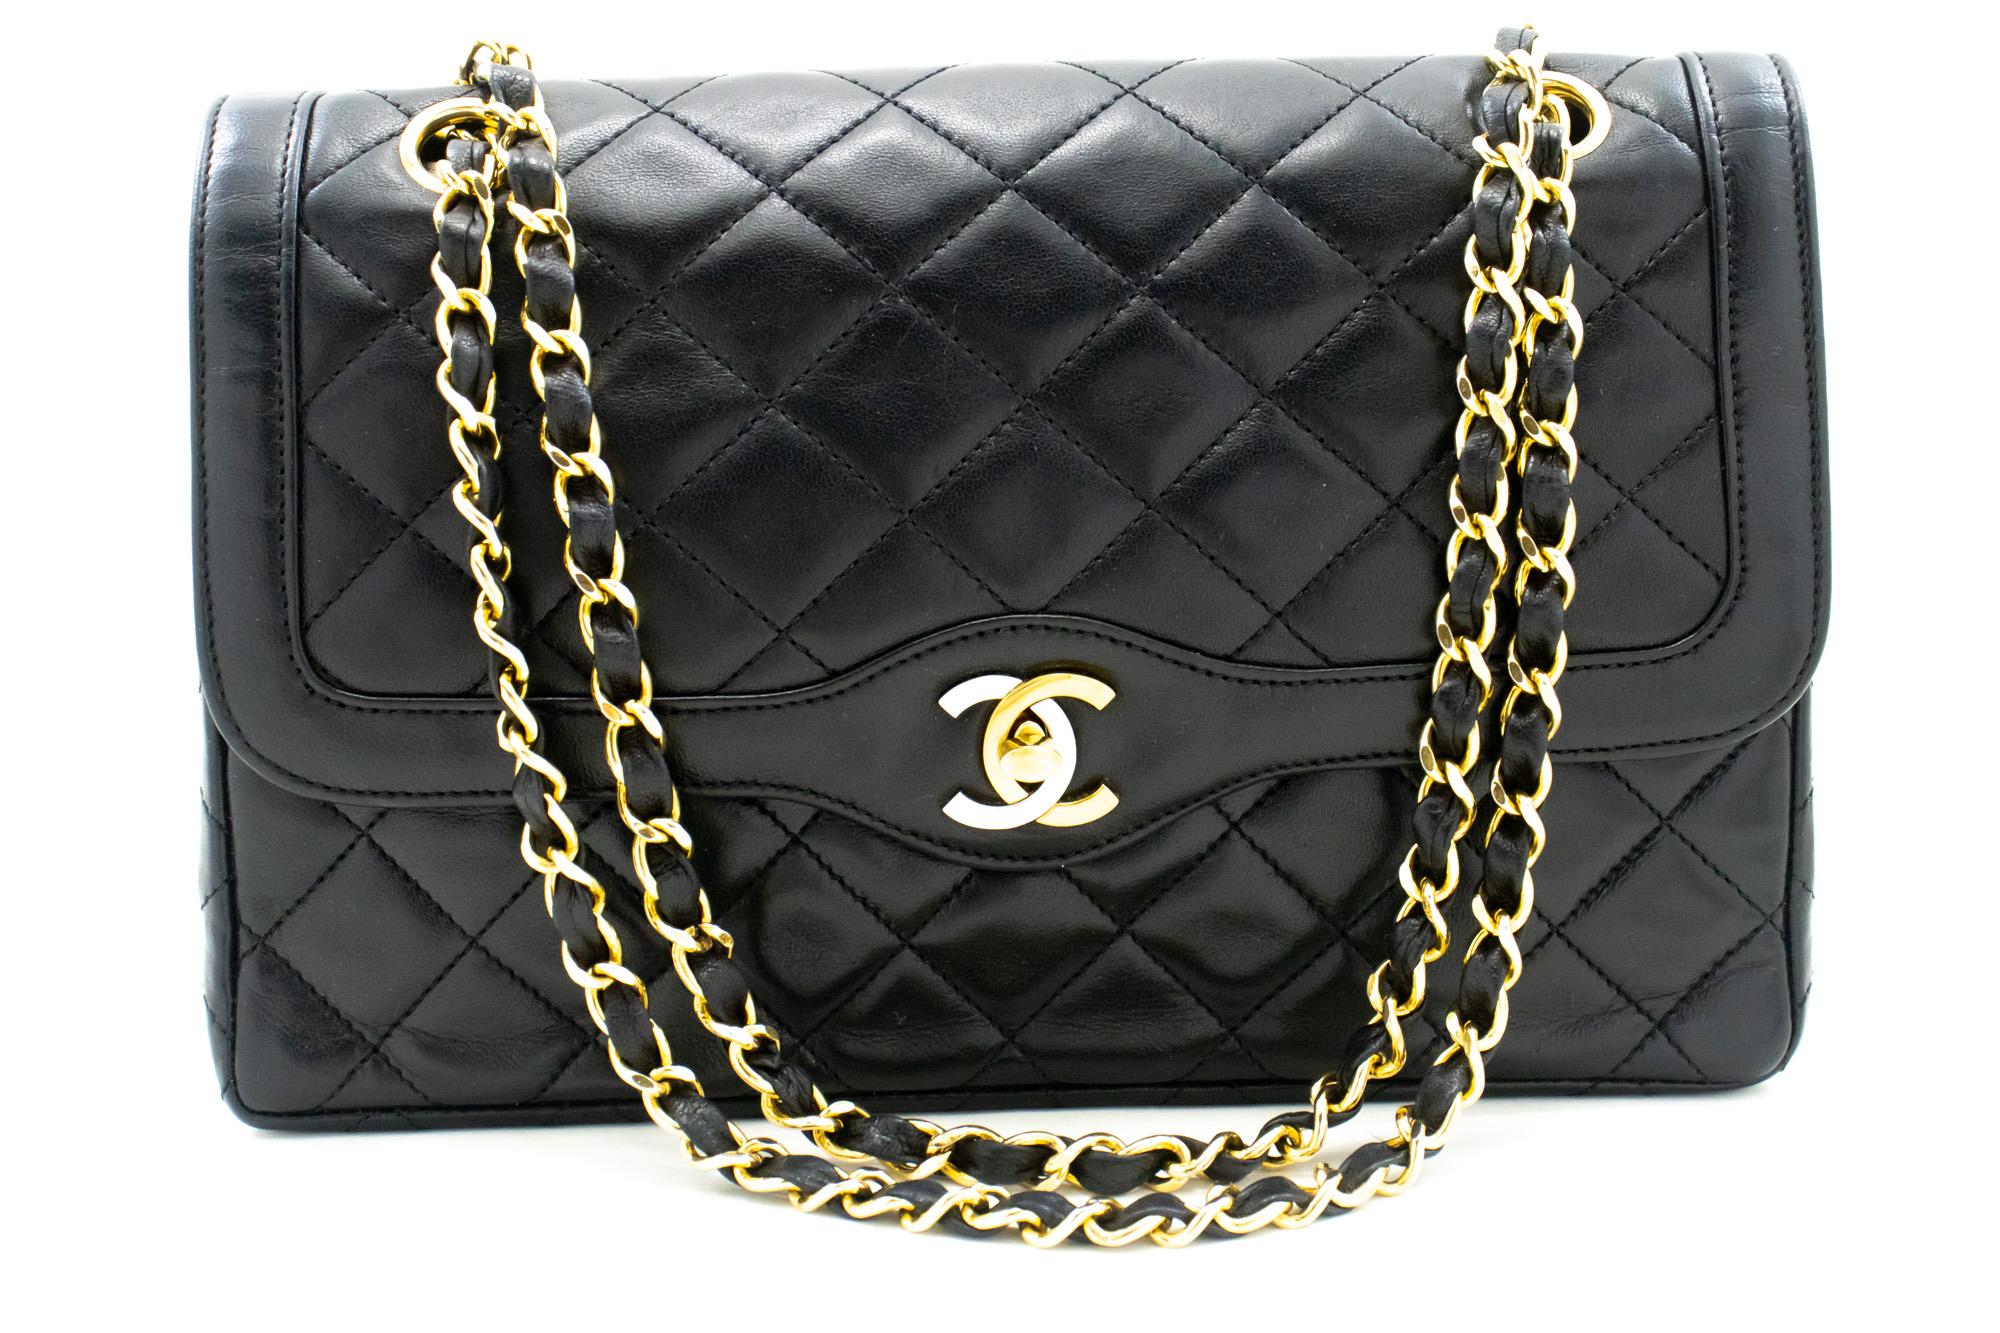 An authentic CHANEL Paris Limited Chain Shoulder Bag Black Quilted Flap Lamb. The color is Black. The outside material is Leather. The pattern is Solid. This item is Vintage / Classic. The year of manufacture would be 1986-1988.
Conditions &